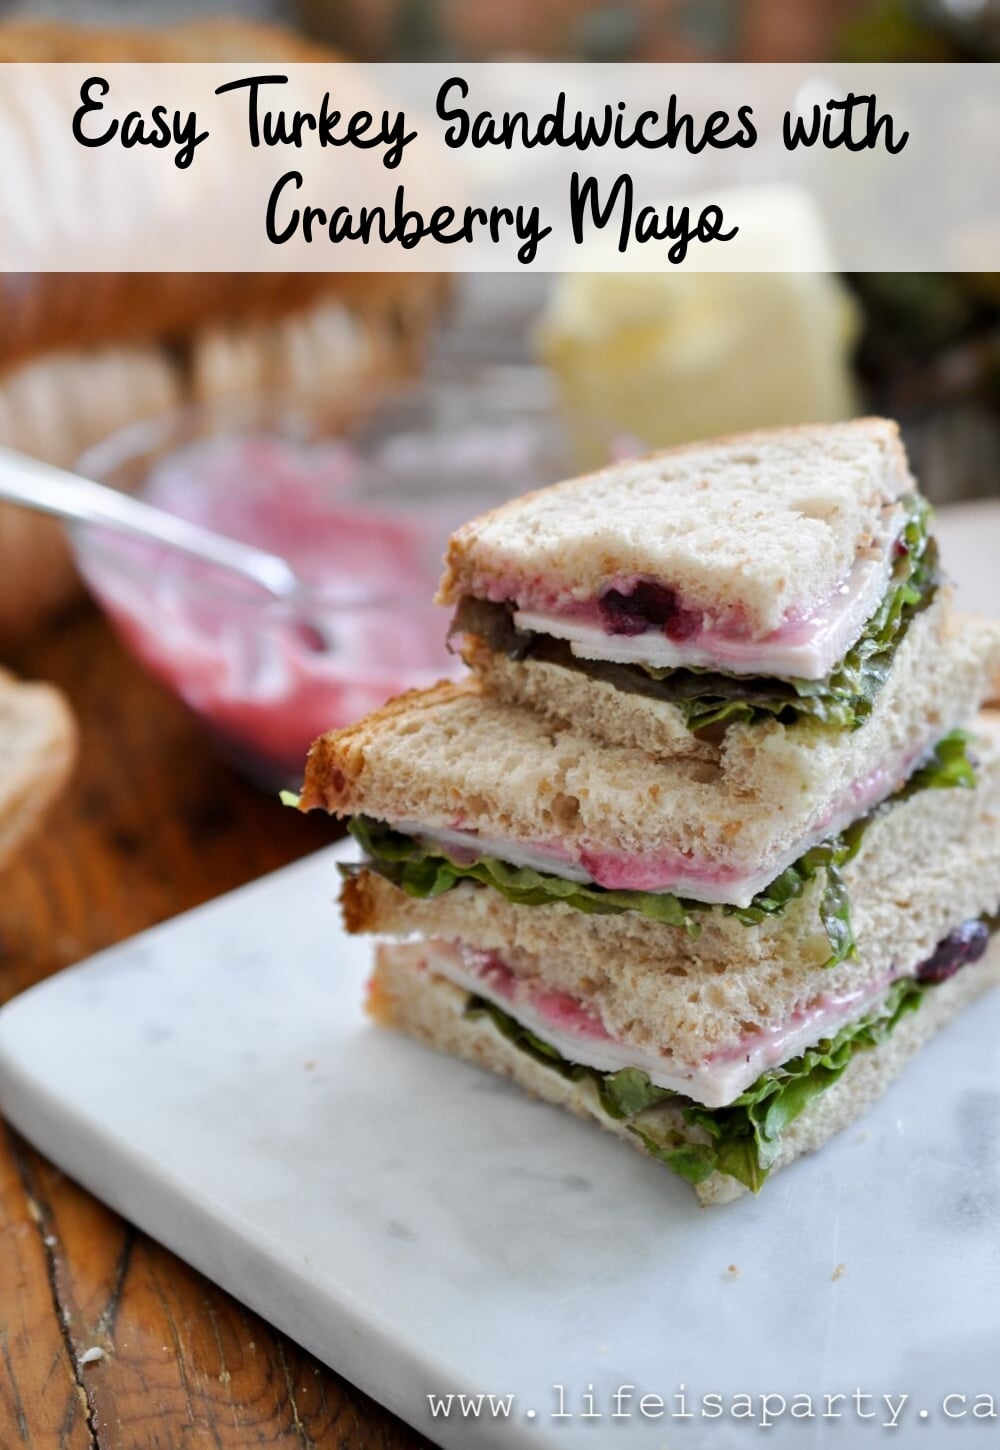 Easy Turkey Sandwiches with Cranberry Mayo